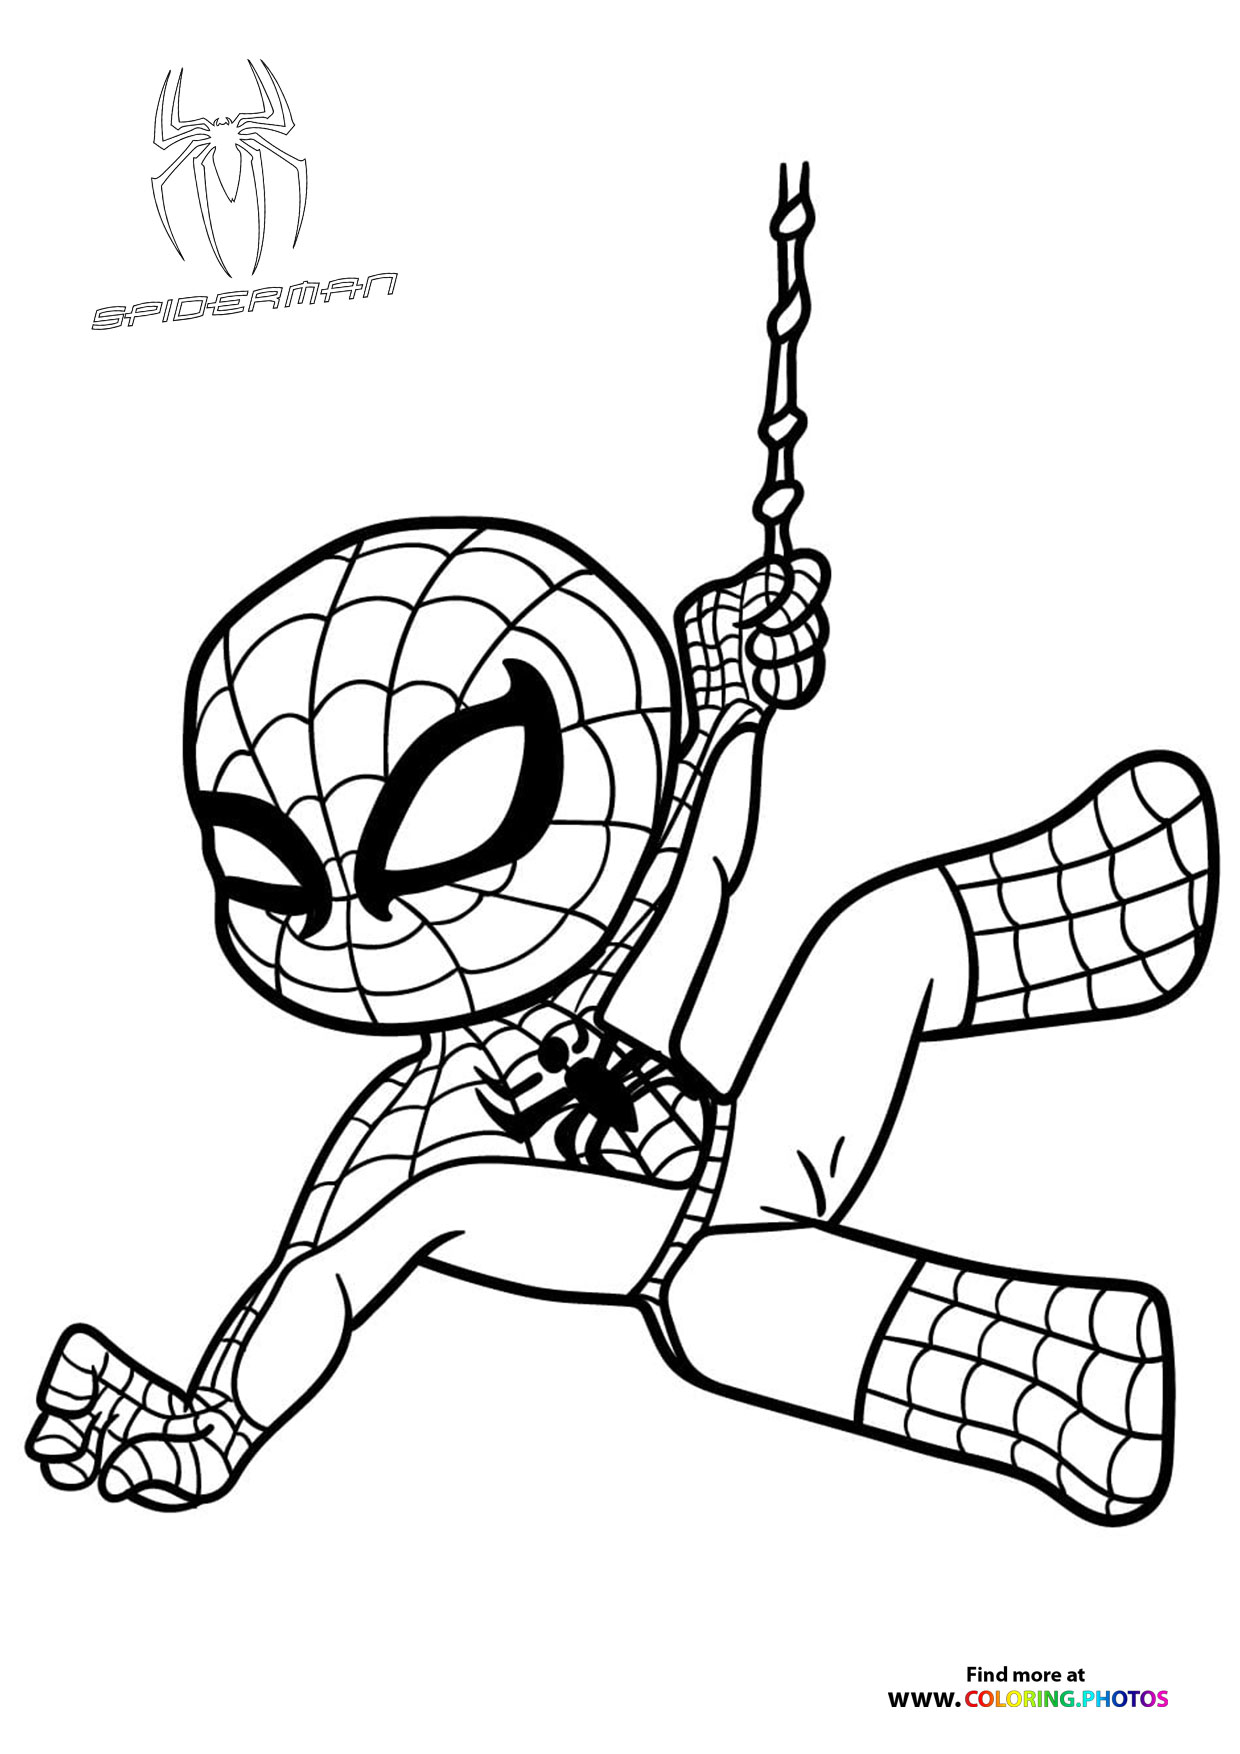 Spiderman coloring pages   Free and easy printable sheets for kids